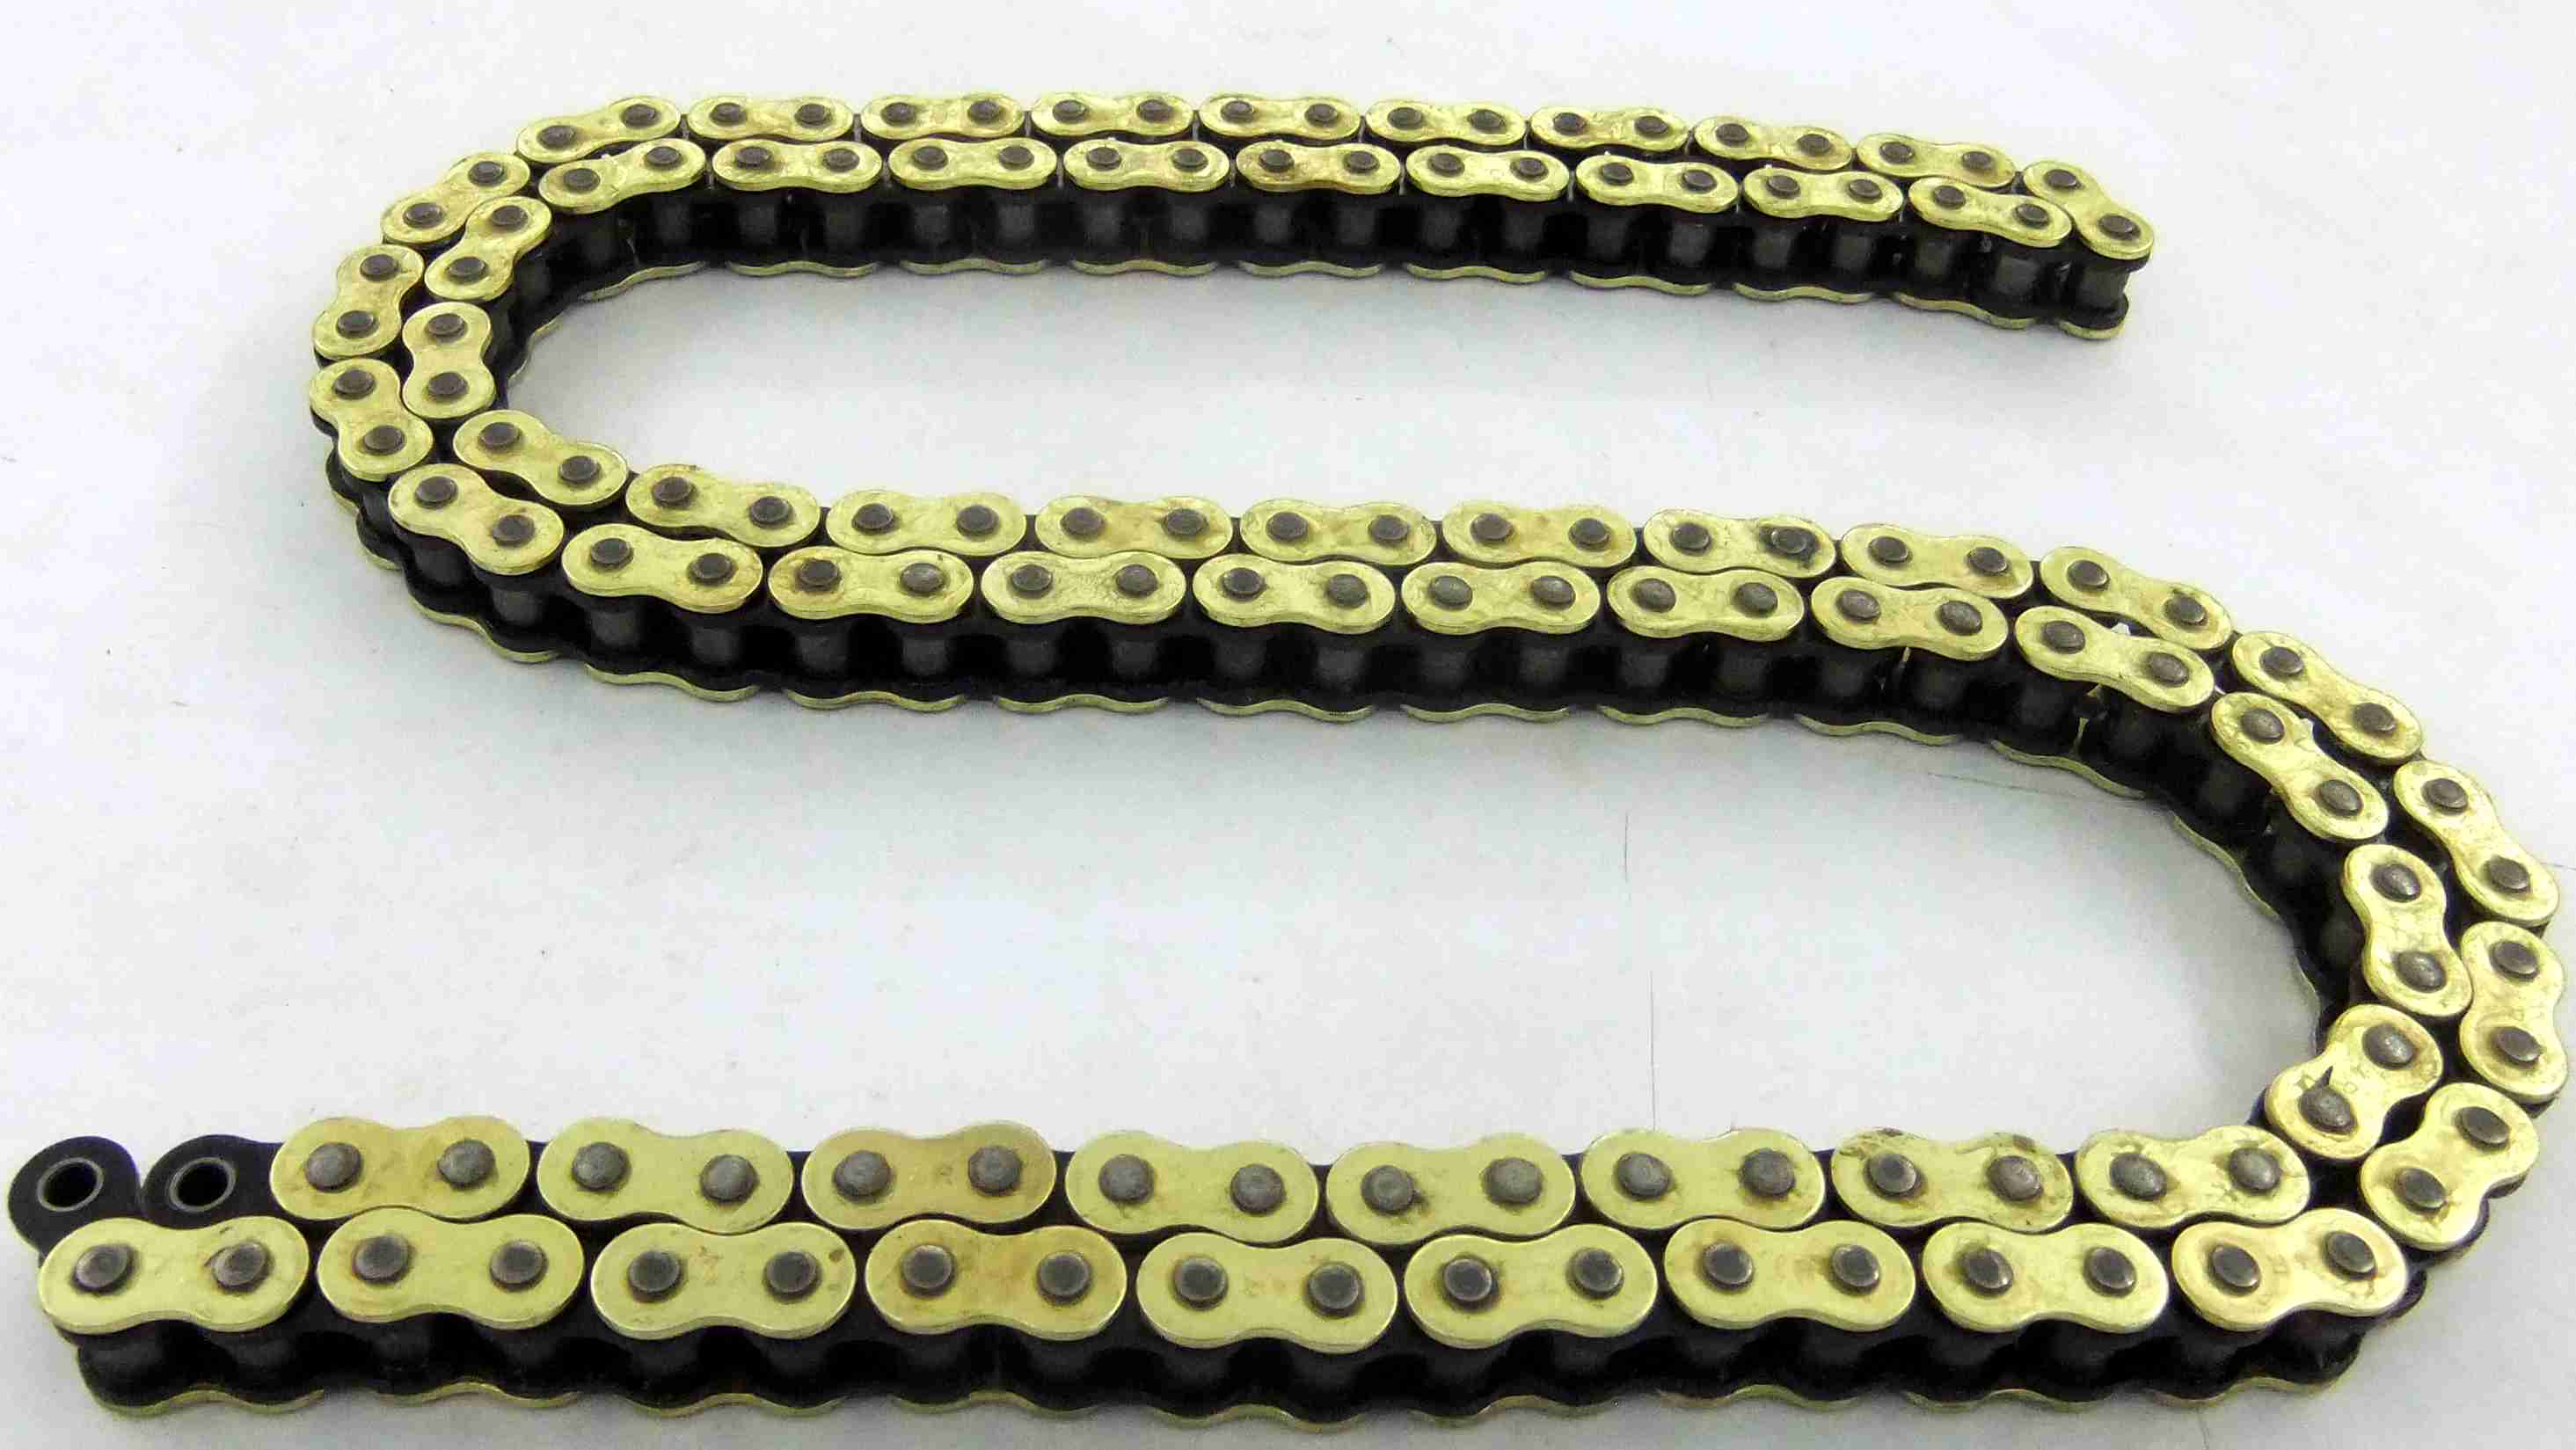 ENUMA CHAIN 525MVXZ2 Q-X-RING ULTRA-STRONG EXTRA-PREMIUM HIGH PERFORMANCE CHAIN 1 METER = 63 LINKS/ROLLING GOLD (REQUIRED QUANTITY  ROLLS OF ORDER FROM 50-630)